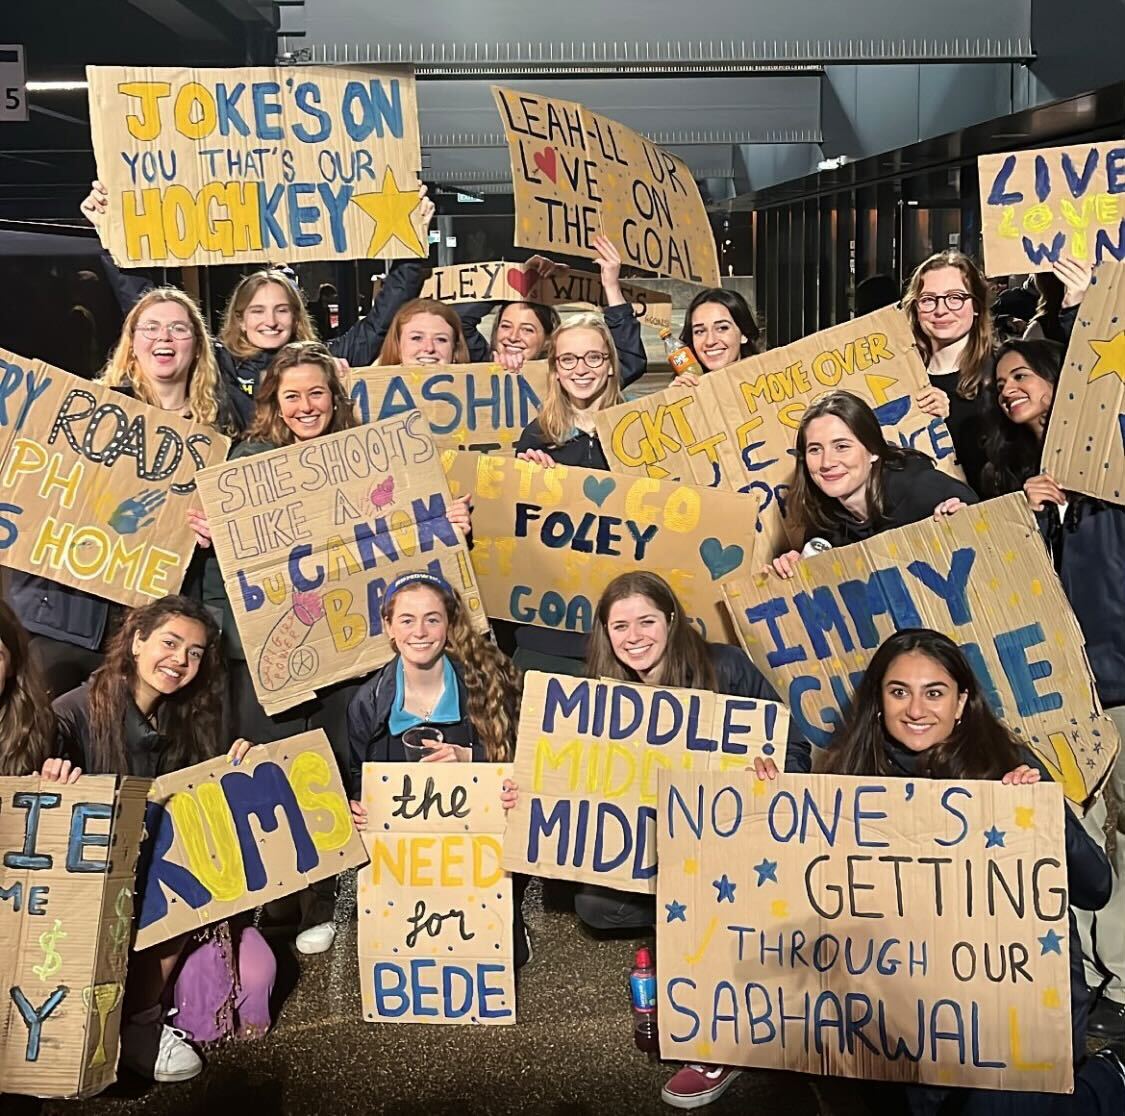 RUMS Women's Hockey crowd with signs at the match, including
'Jokes on you that's our Hoghkey'
'Leah-ll ur love on the goal'
'The need for Bede'